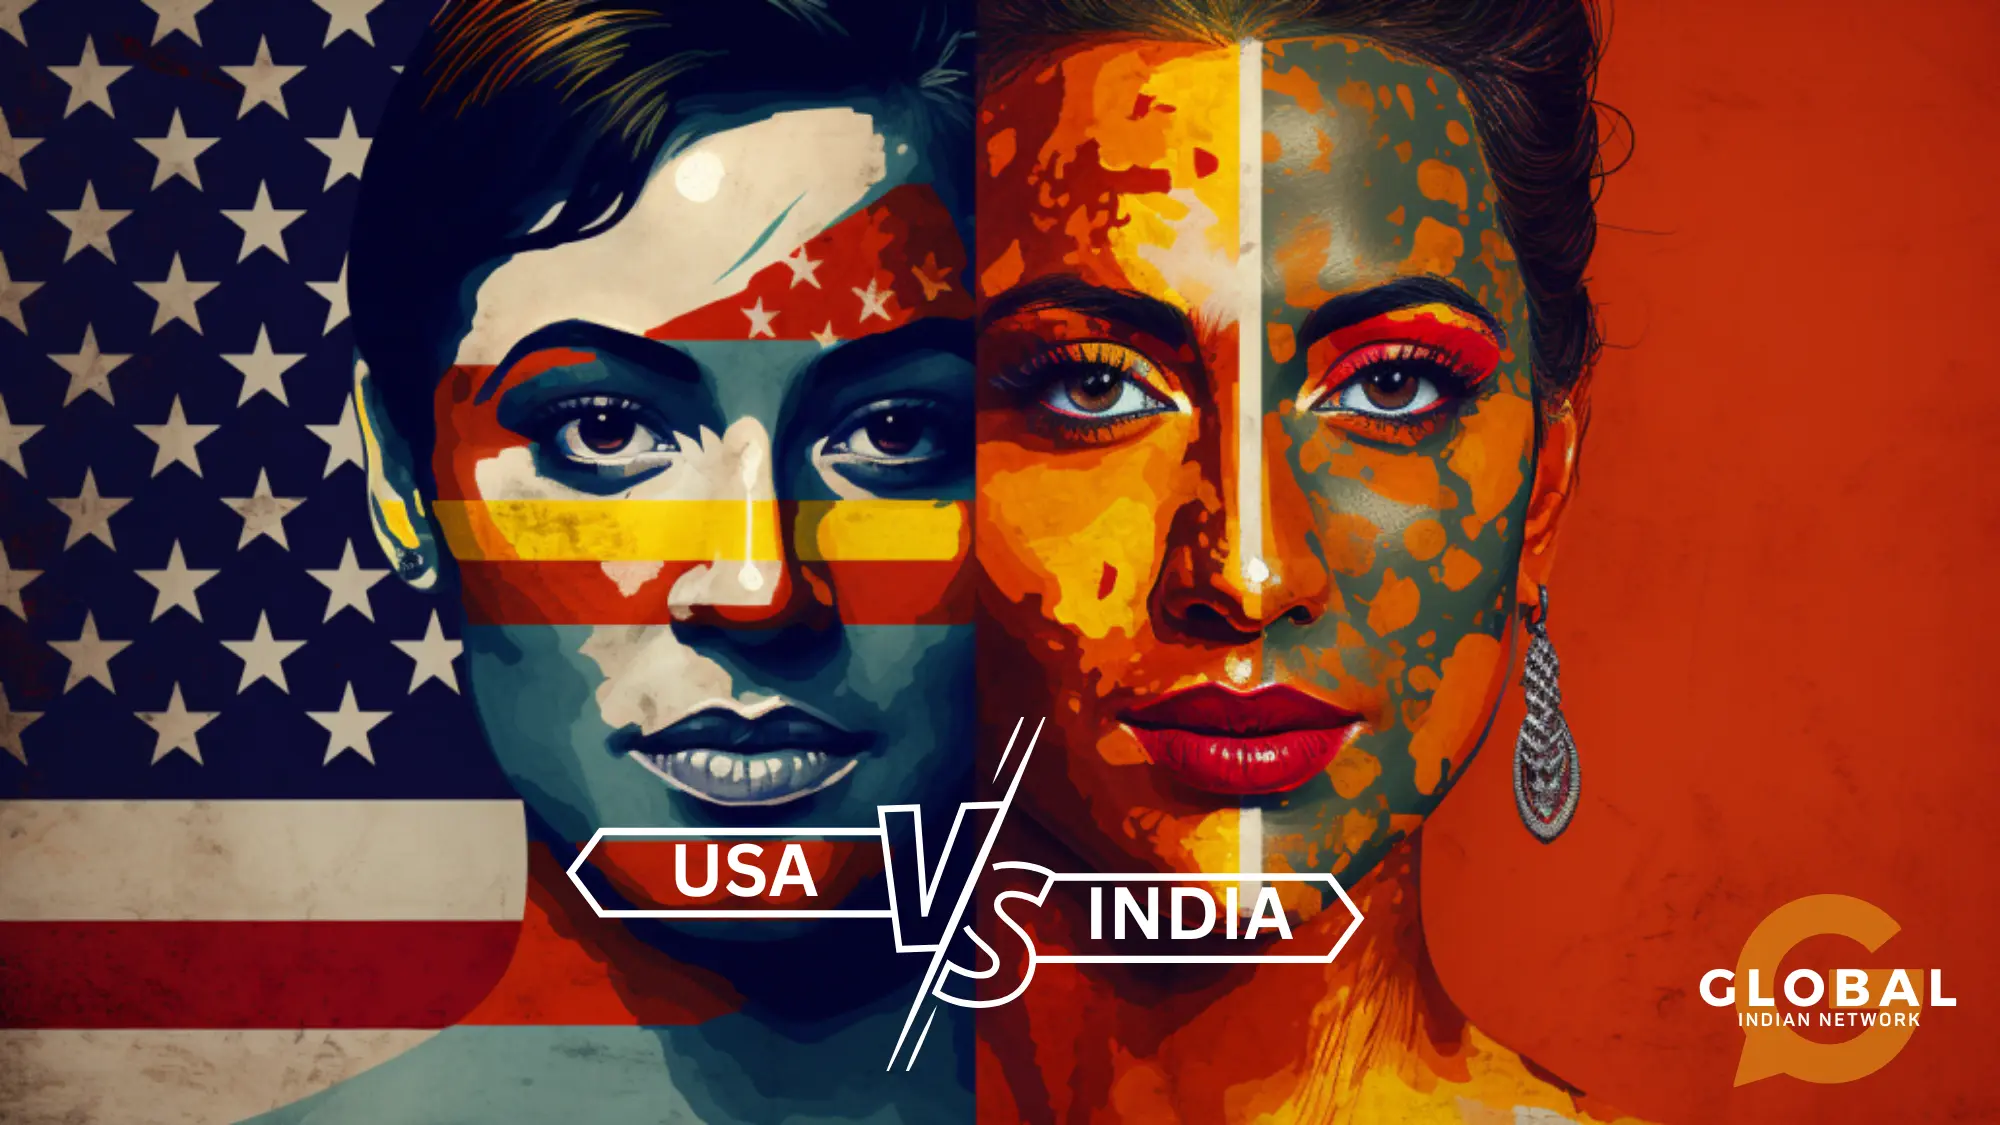 Cultural Differences Between US and India